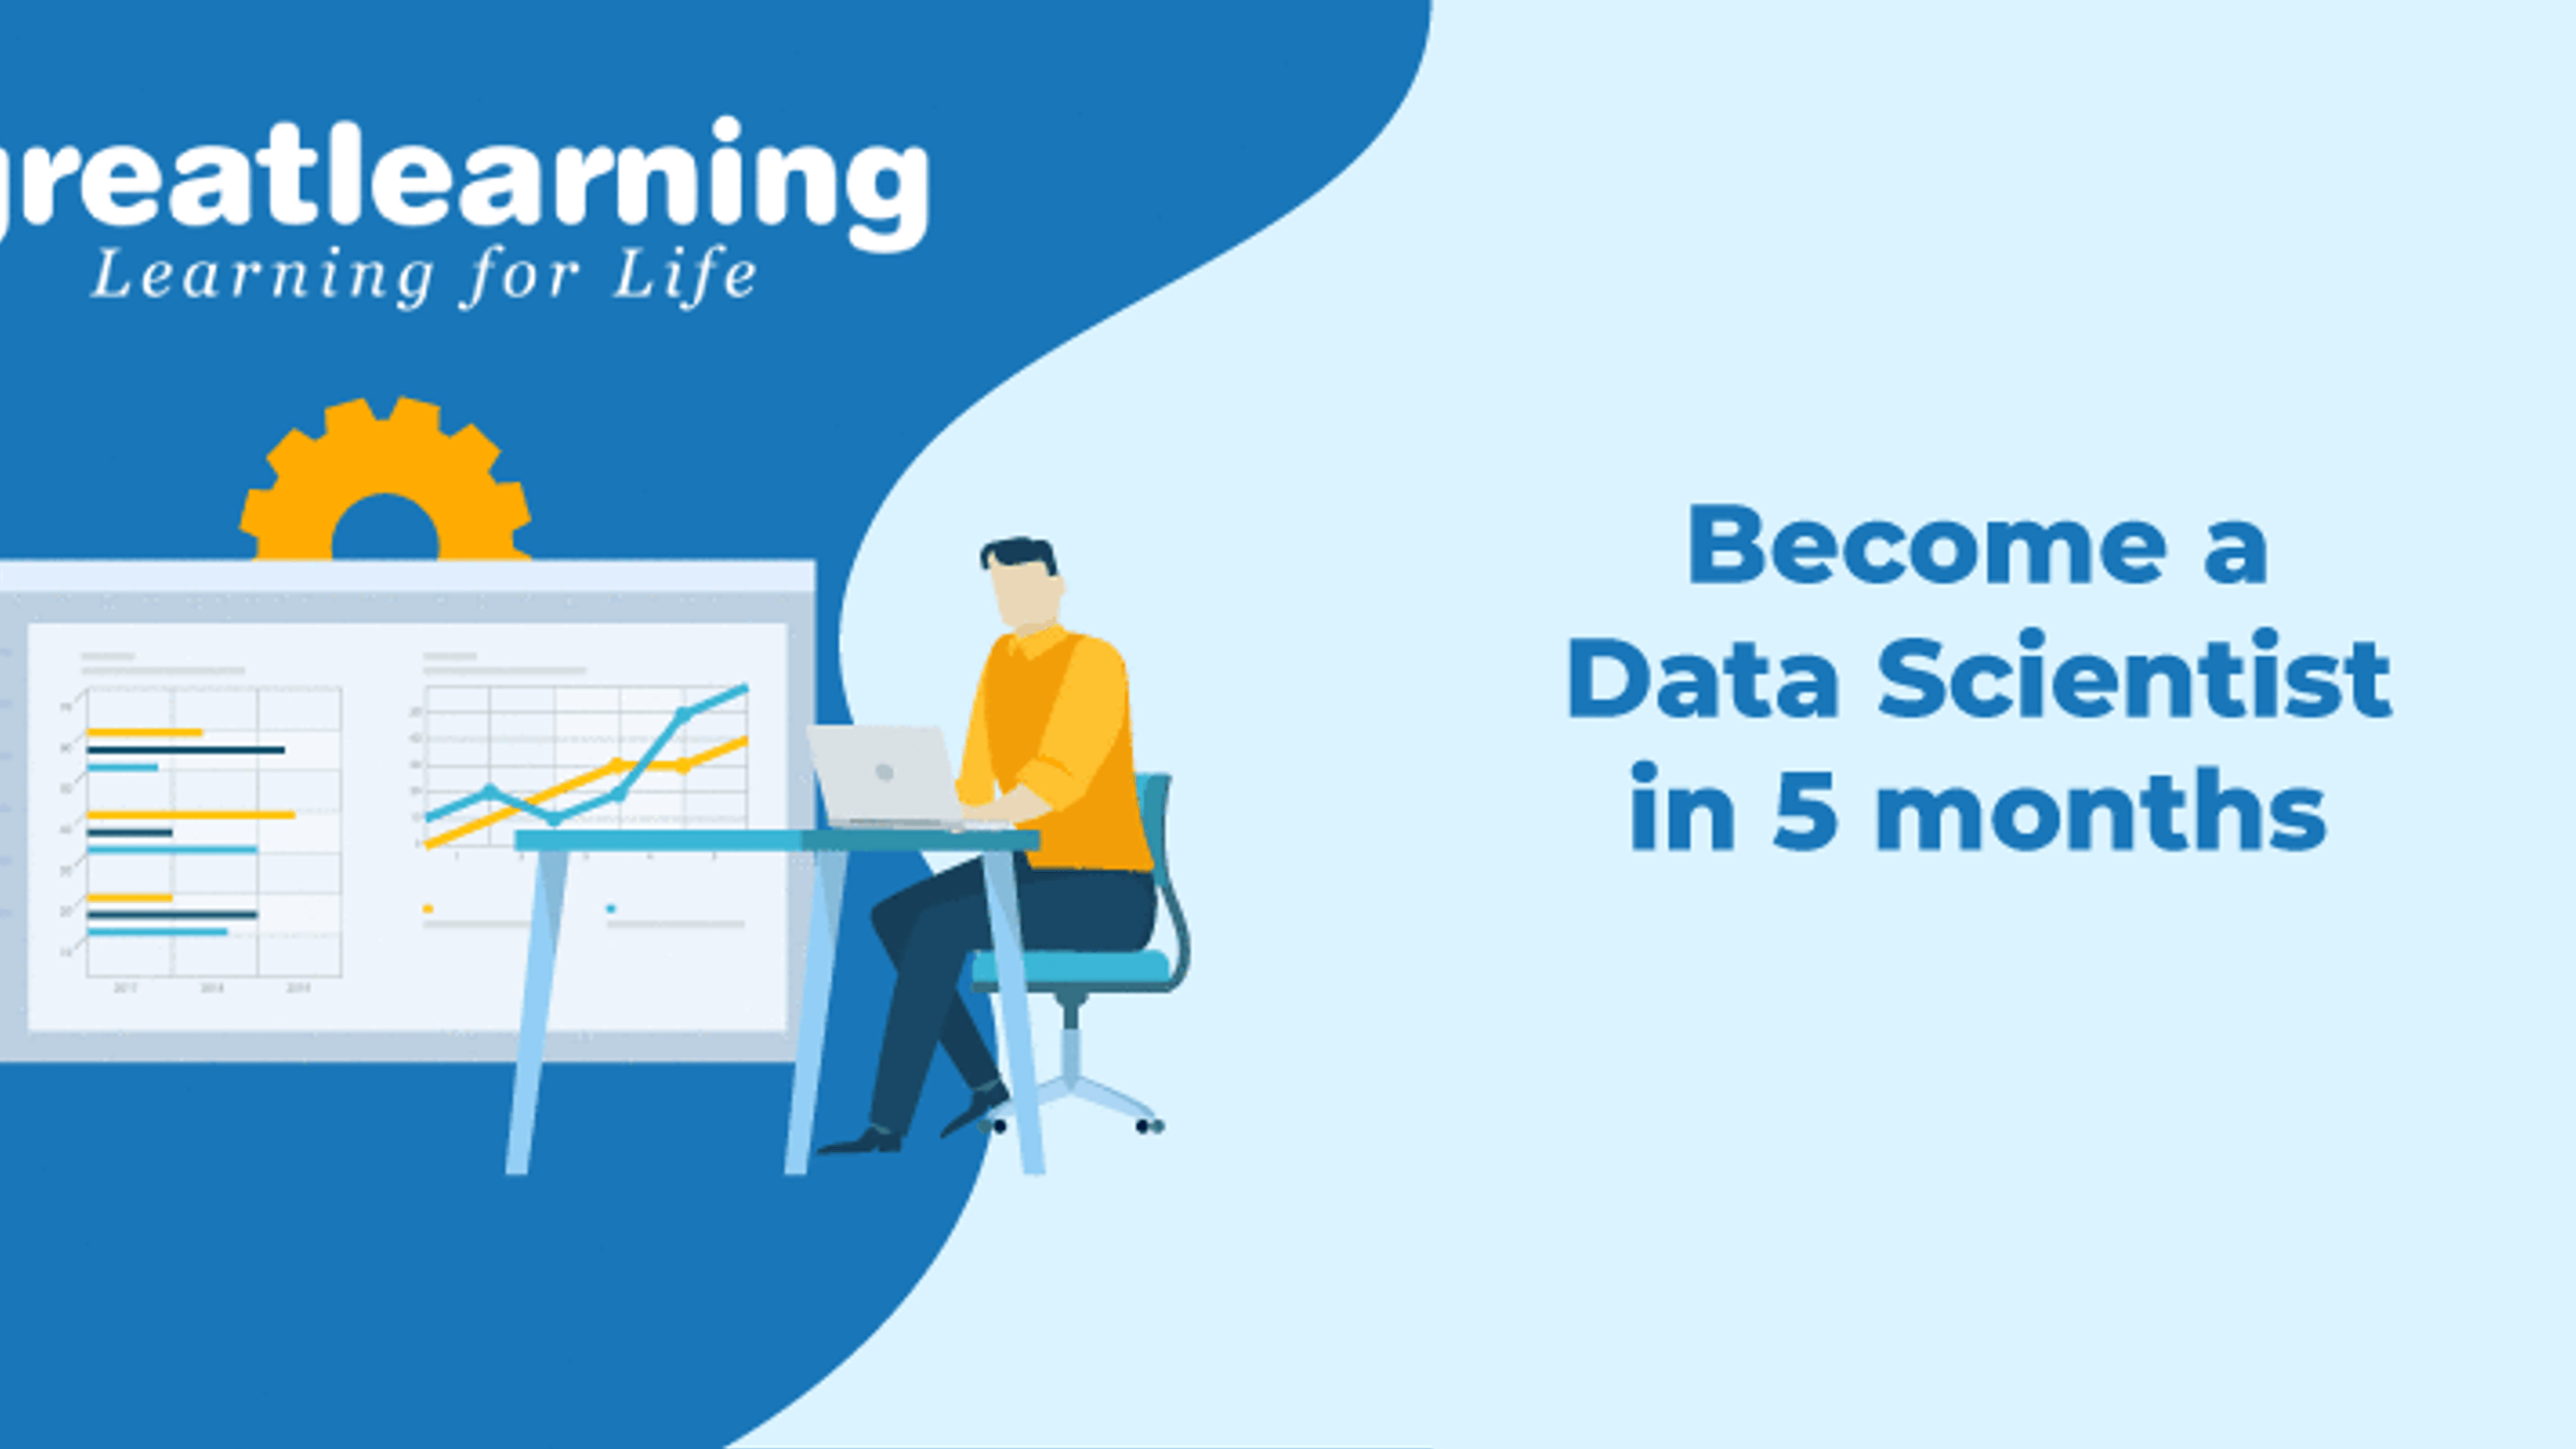 How upskilling in Data Science can help fresh college grads land lucrative jobs in Uber, Mercedes Benz and other top companies